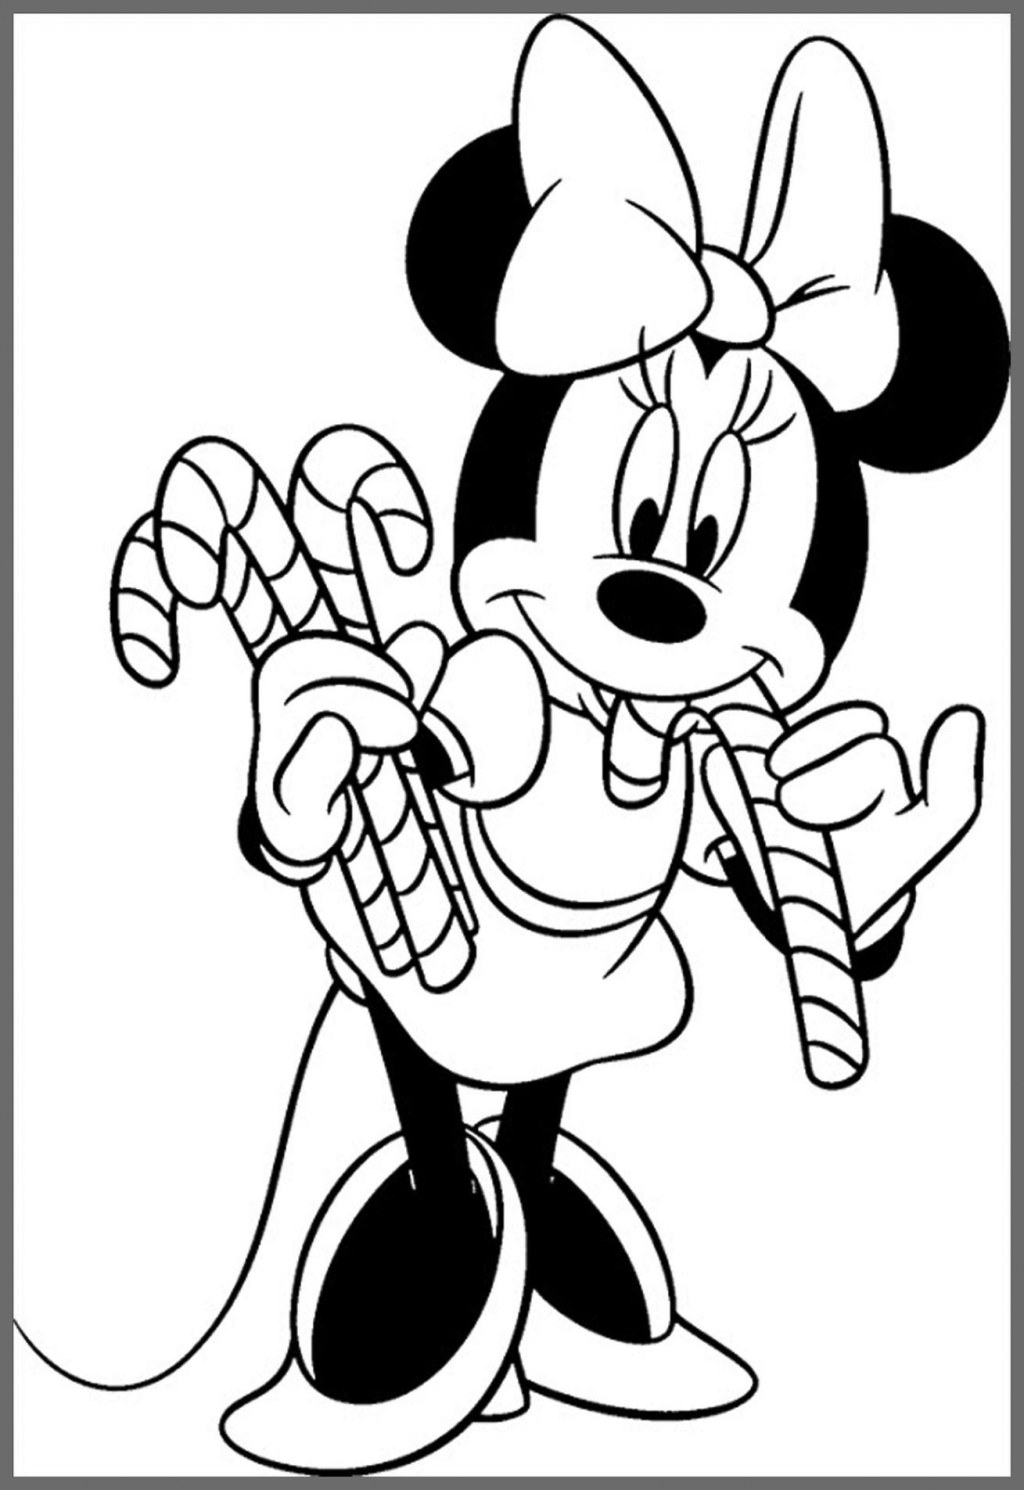 Picture of: Mickey Mouse Christmas Coloring Pages – Best Coloring Pages For Kids